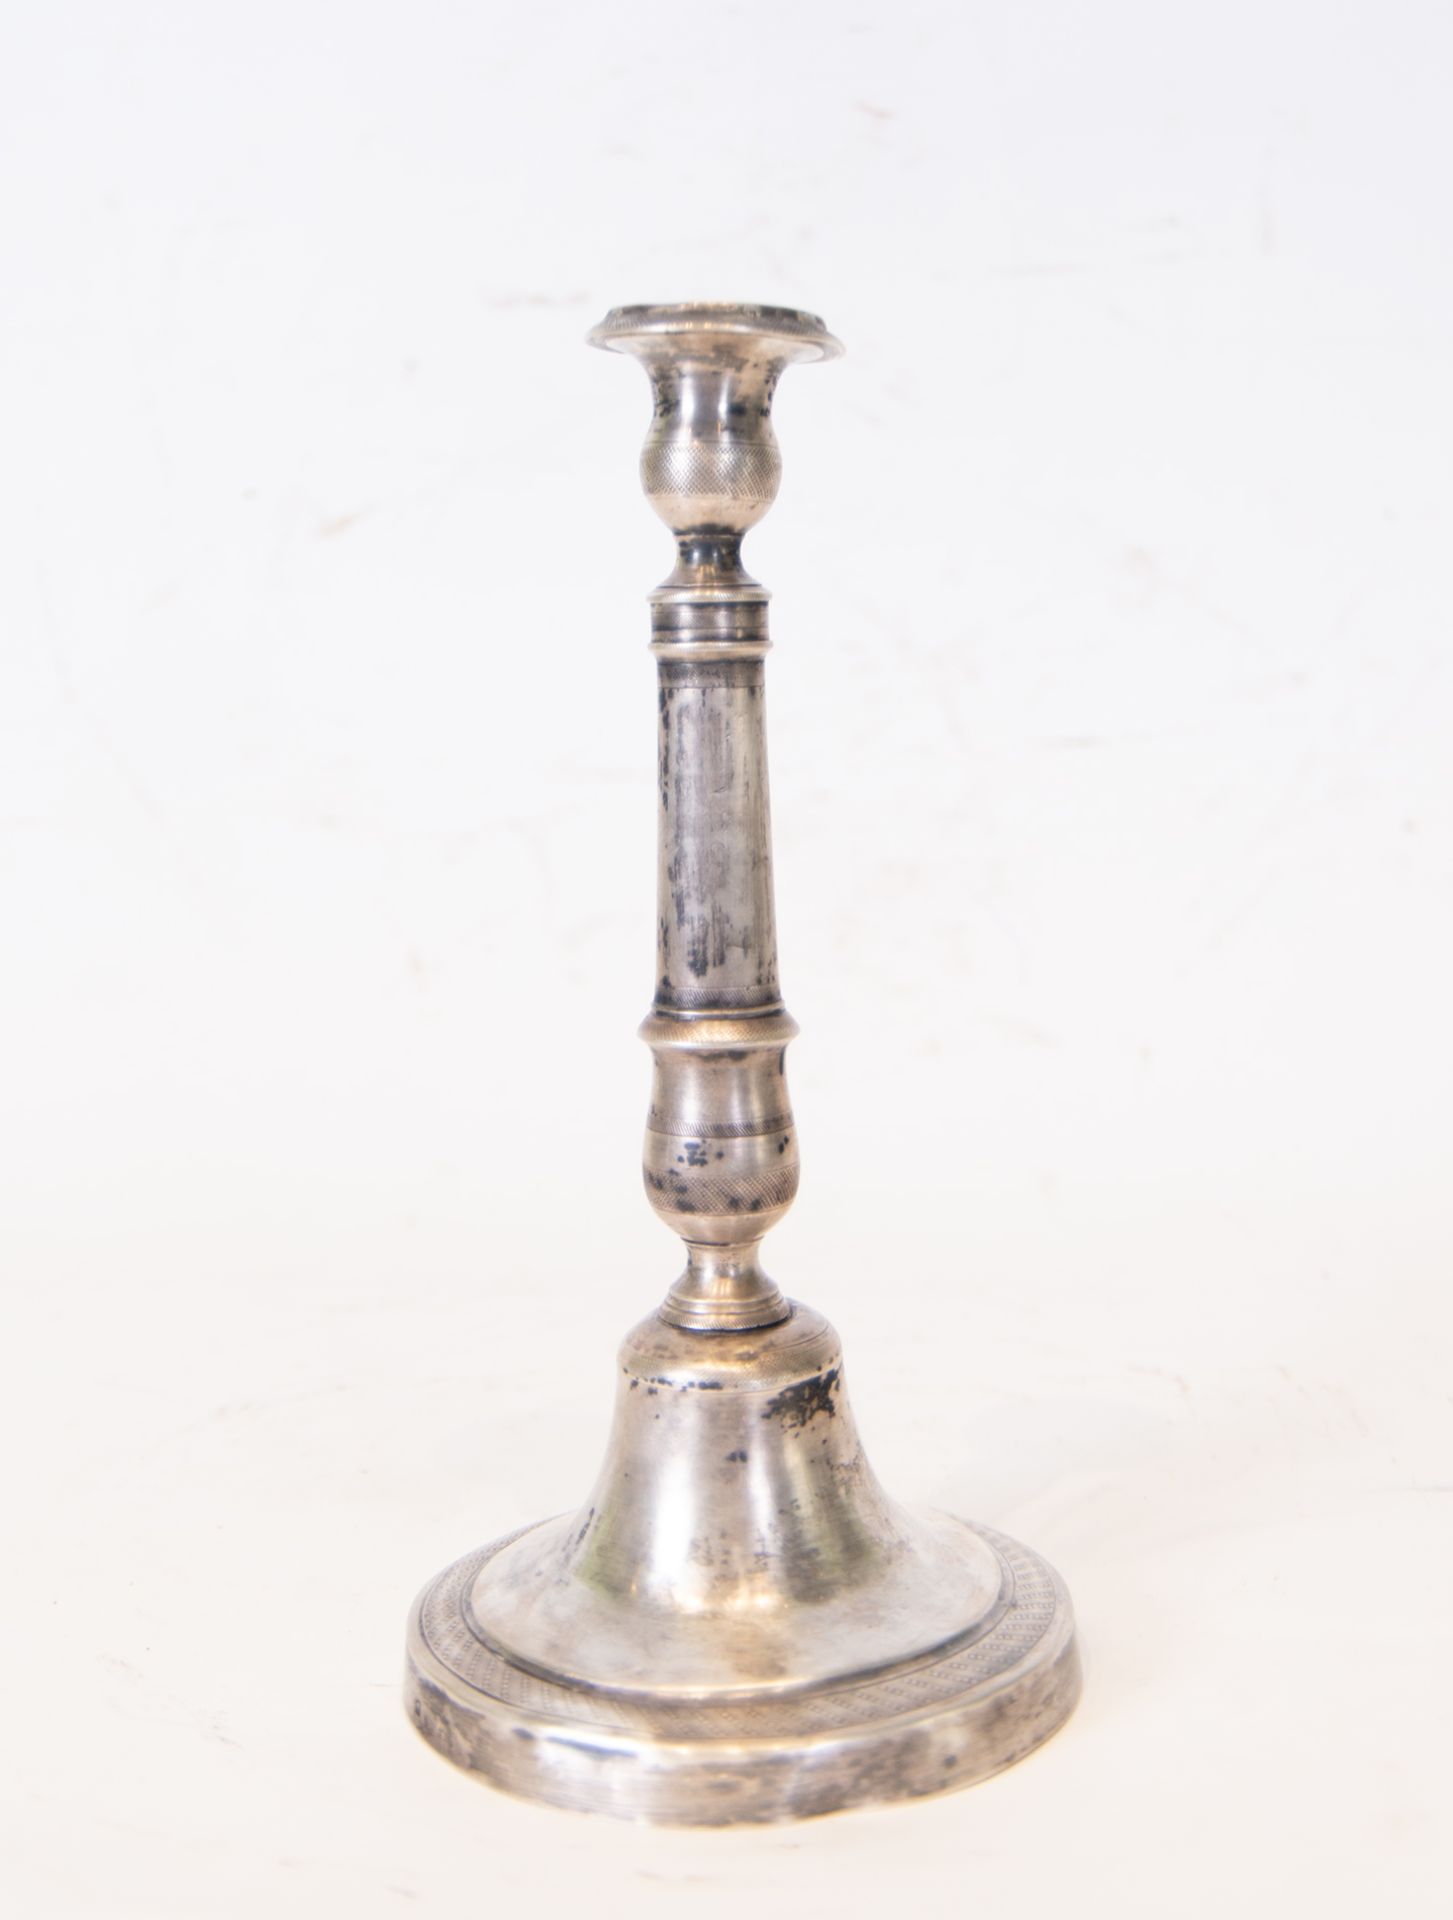 Pair of rare Fernandino candlesticks in solid silver, Spanish school of the 18th - 19th century - Image 3 of 8